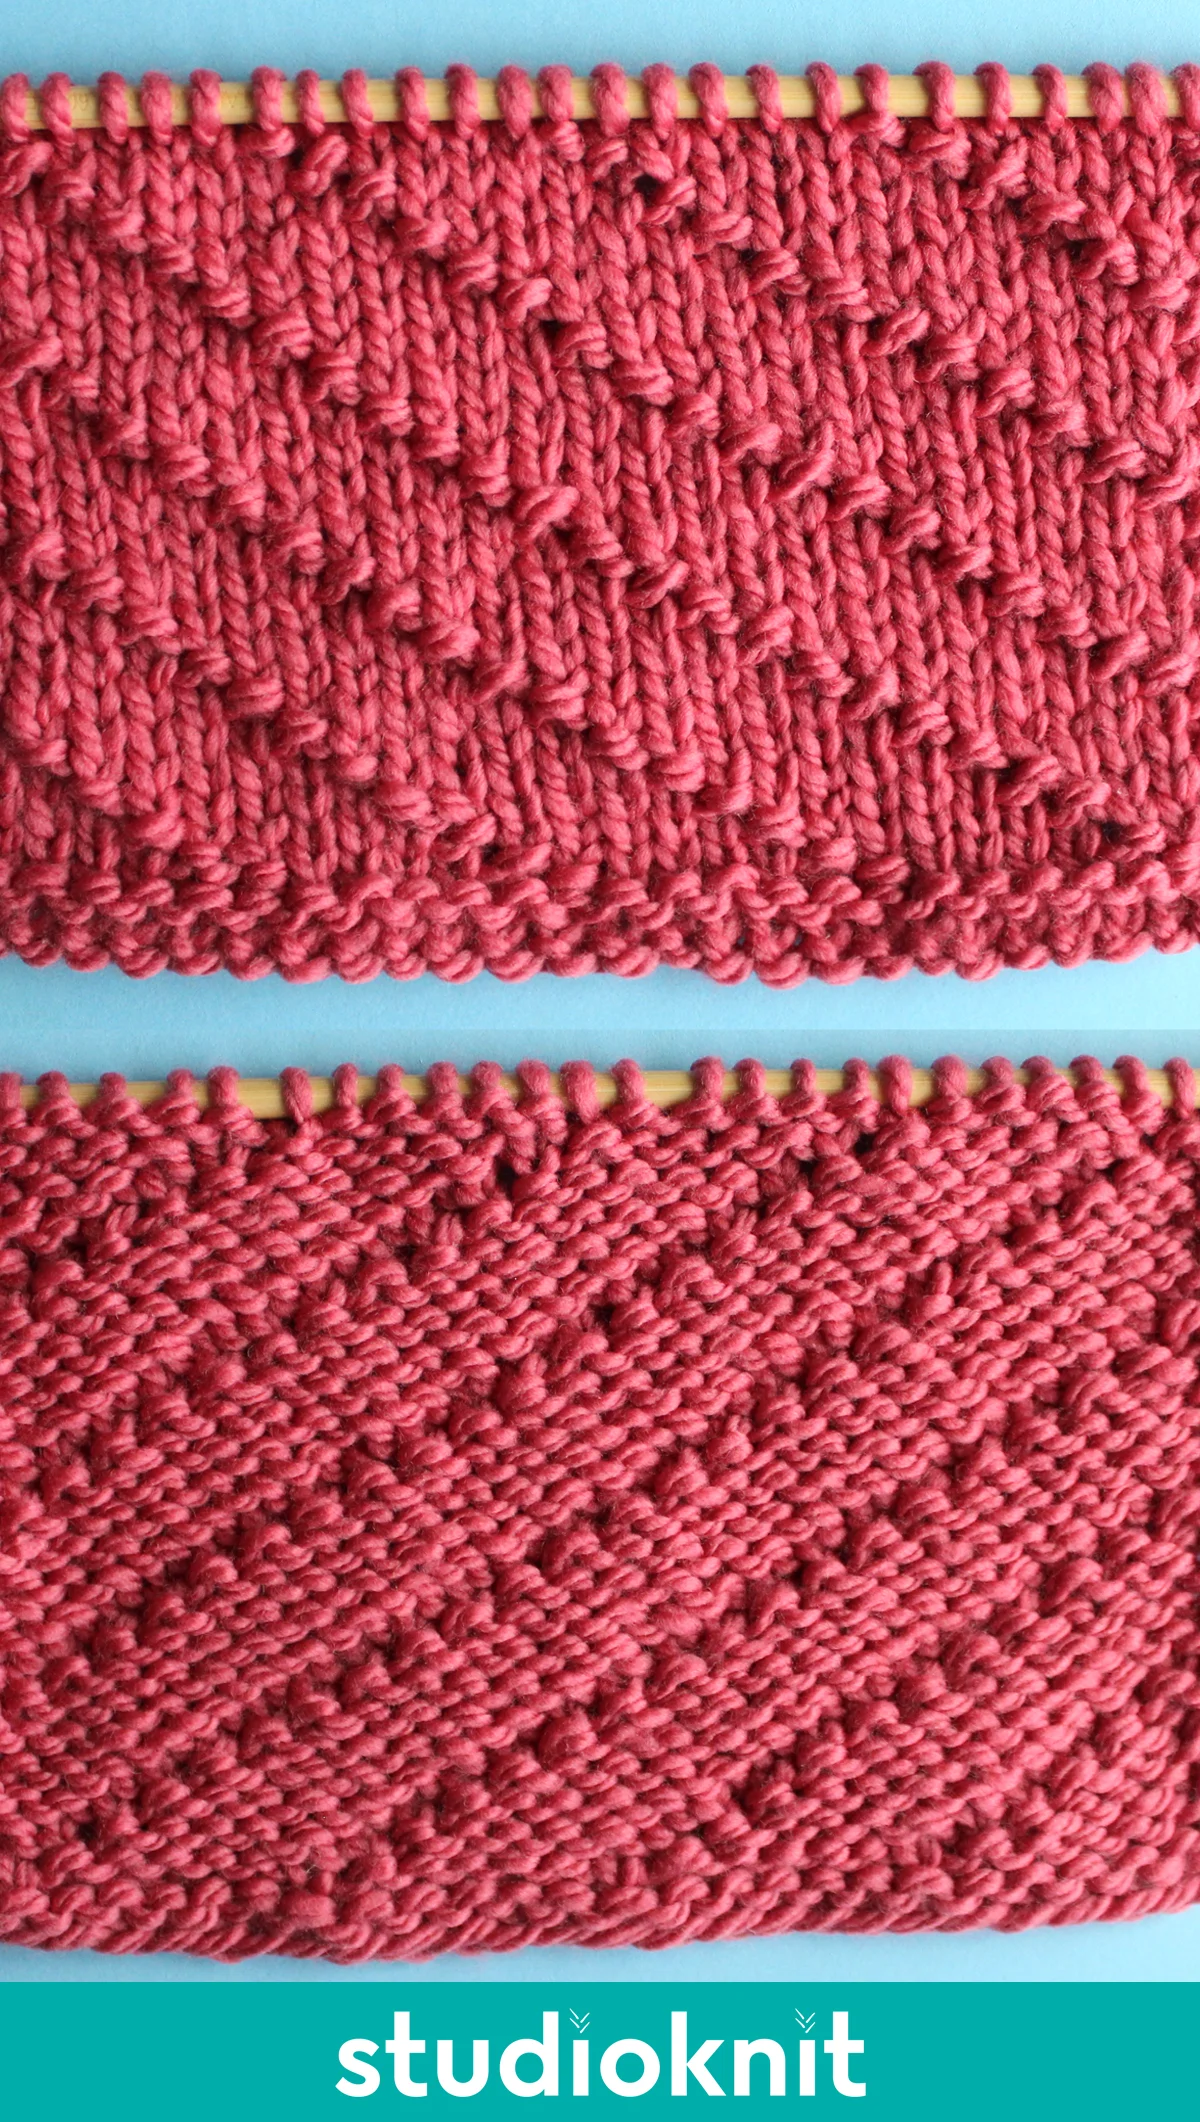 Diagonal Seed Knit Stitch Pattern right and wrong sides in pink yarn.